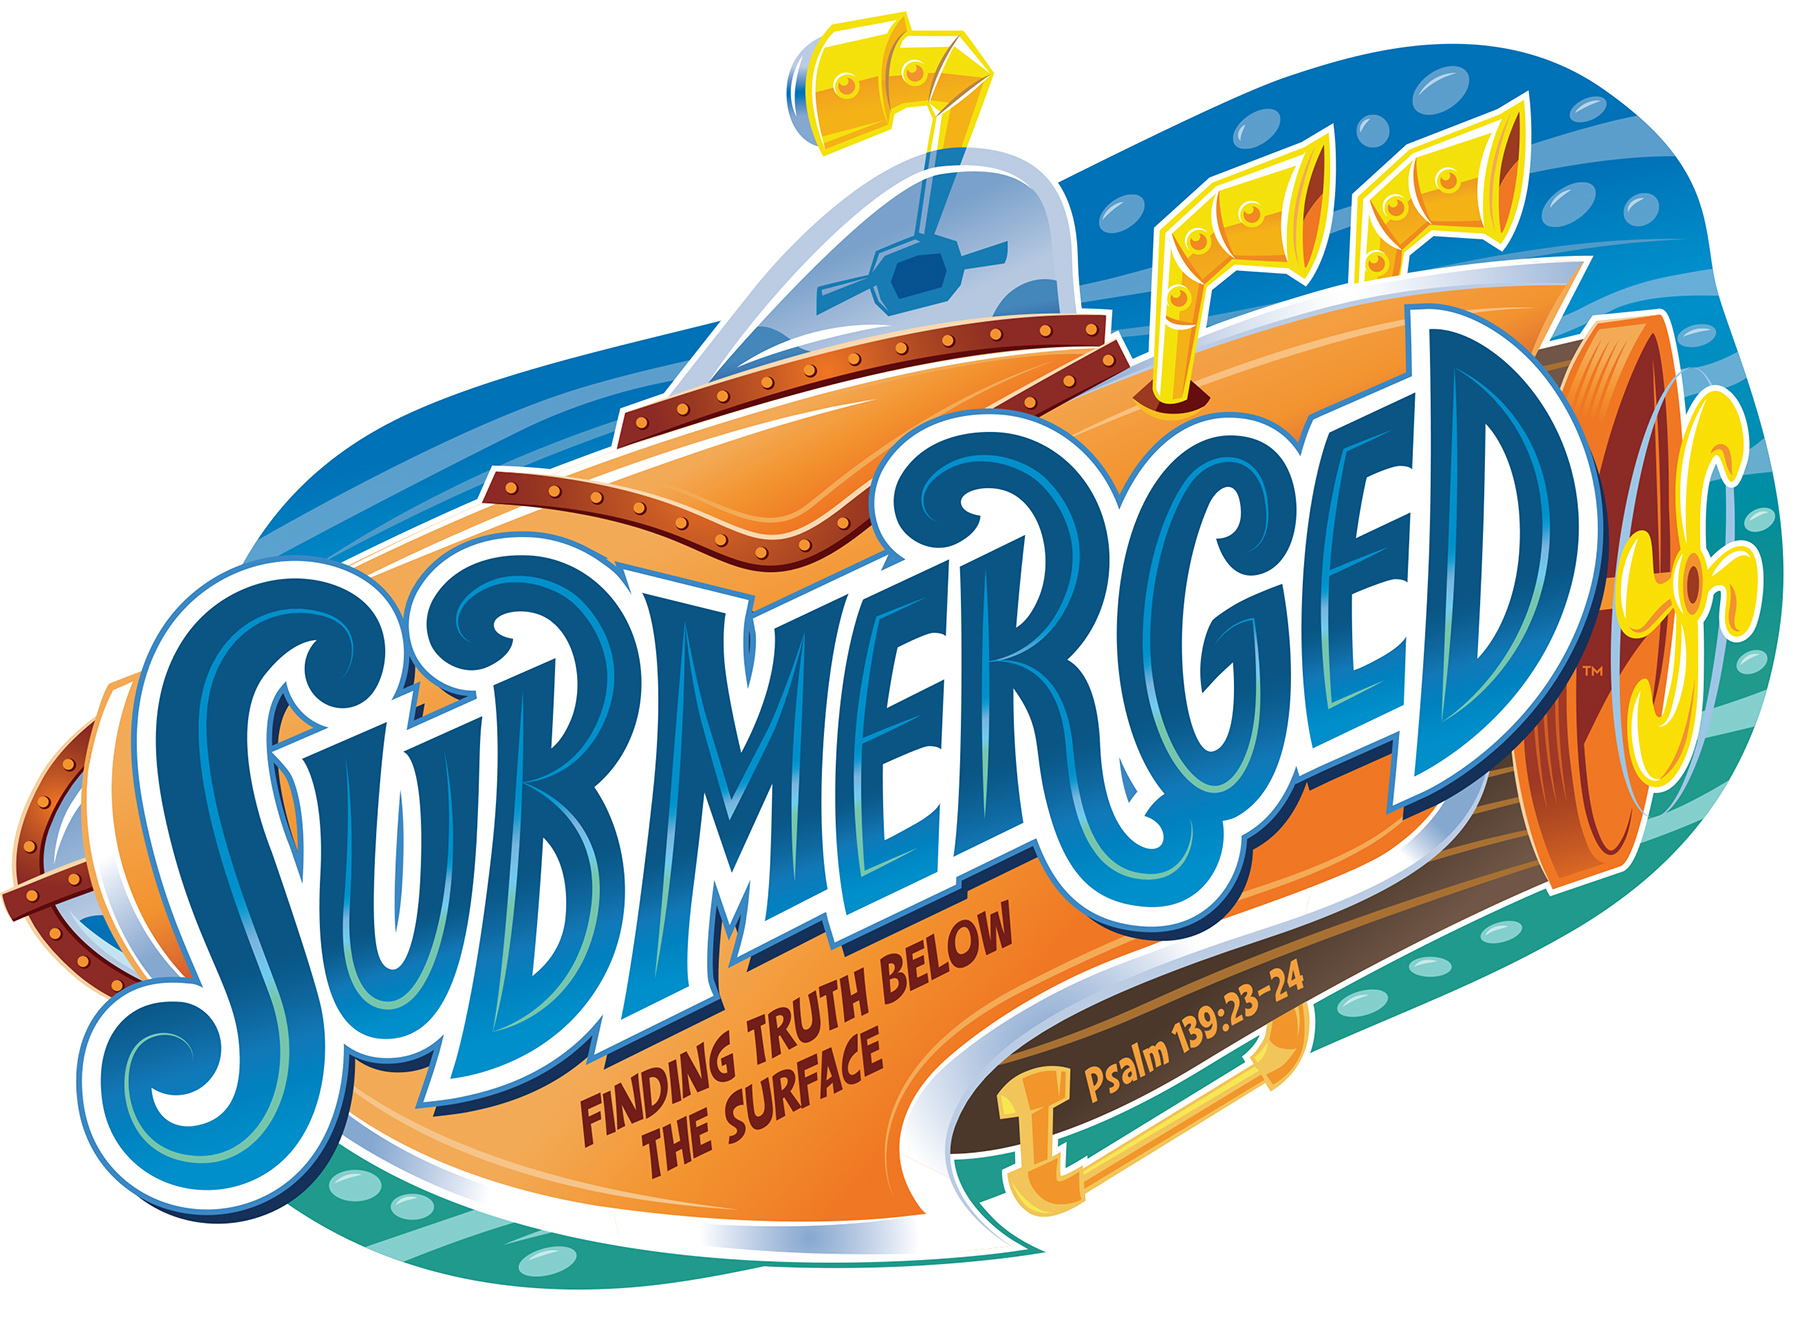 2016 Vbs Takes Kids Deeper In God S Word With  Submerged